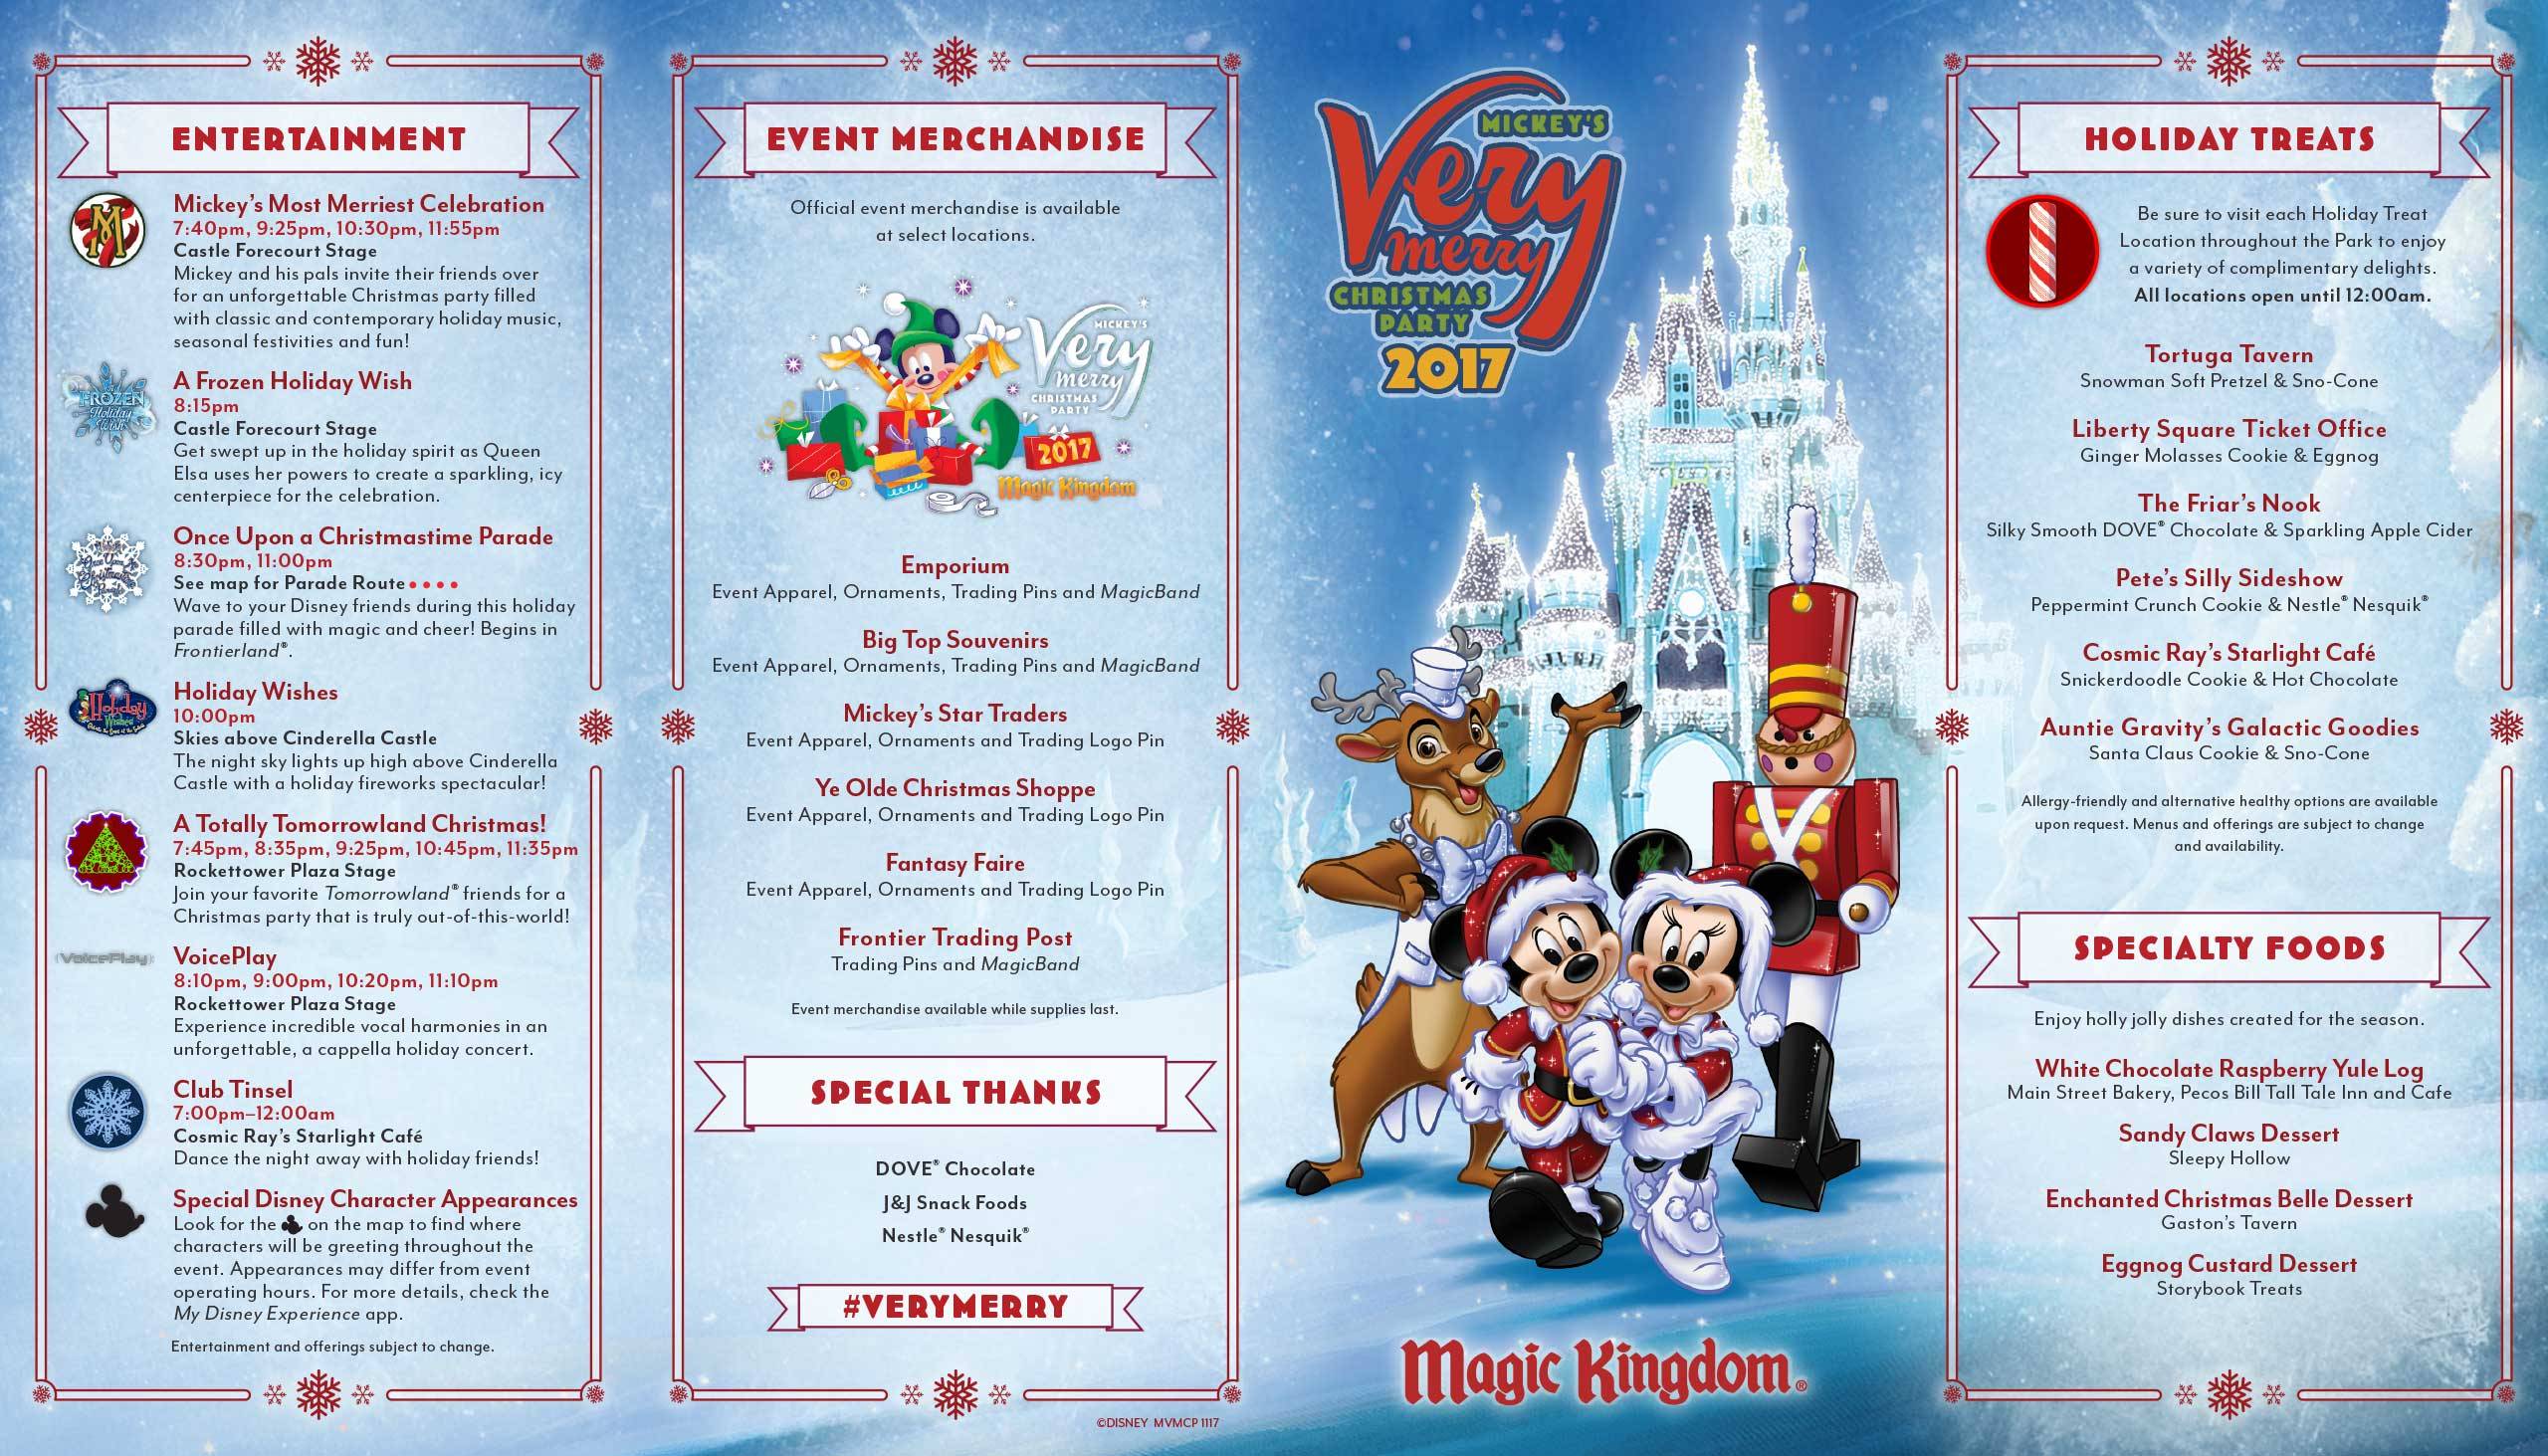 PHOTOS - 2017 Mickey's Very Merry Christmas Party guide map